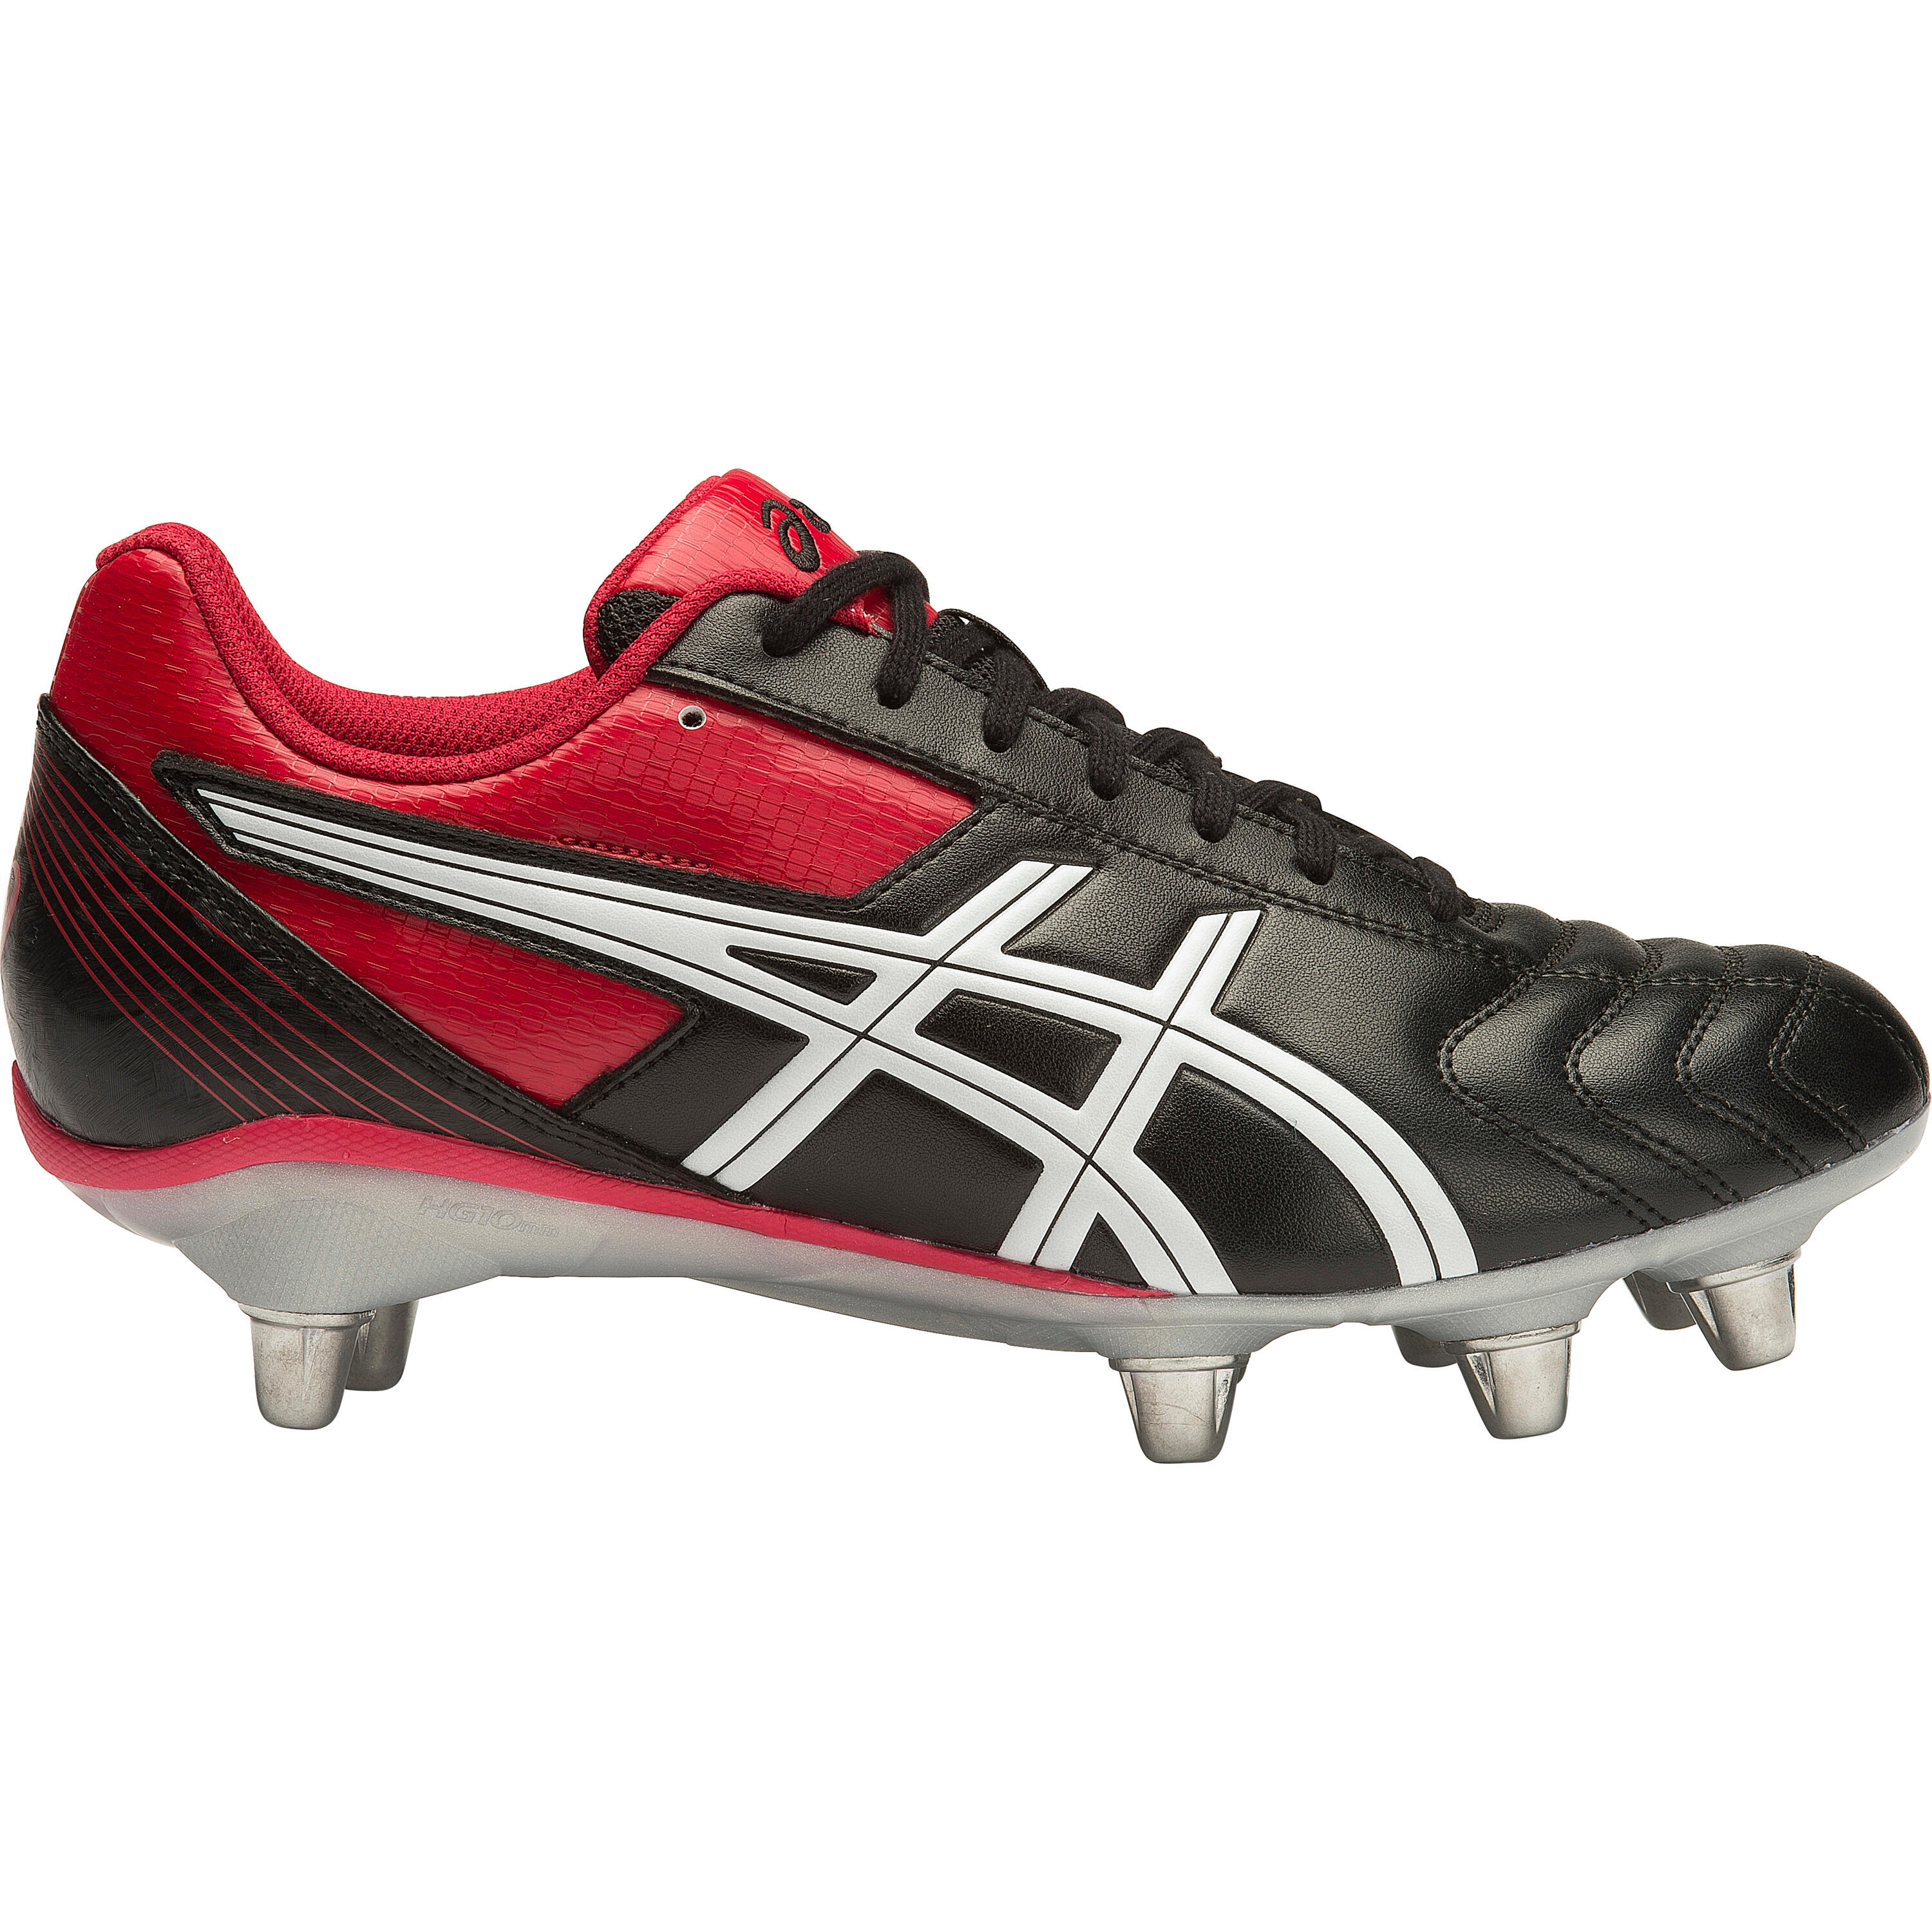 Asics Lethal Tackle Soft Ground Rugby Boots Adults  7 UK black/racing red/white 5/5